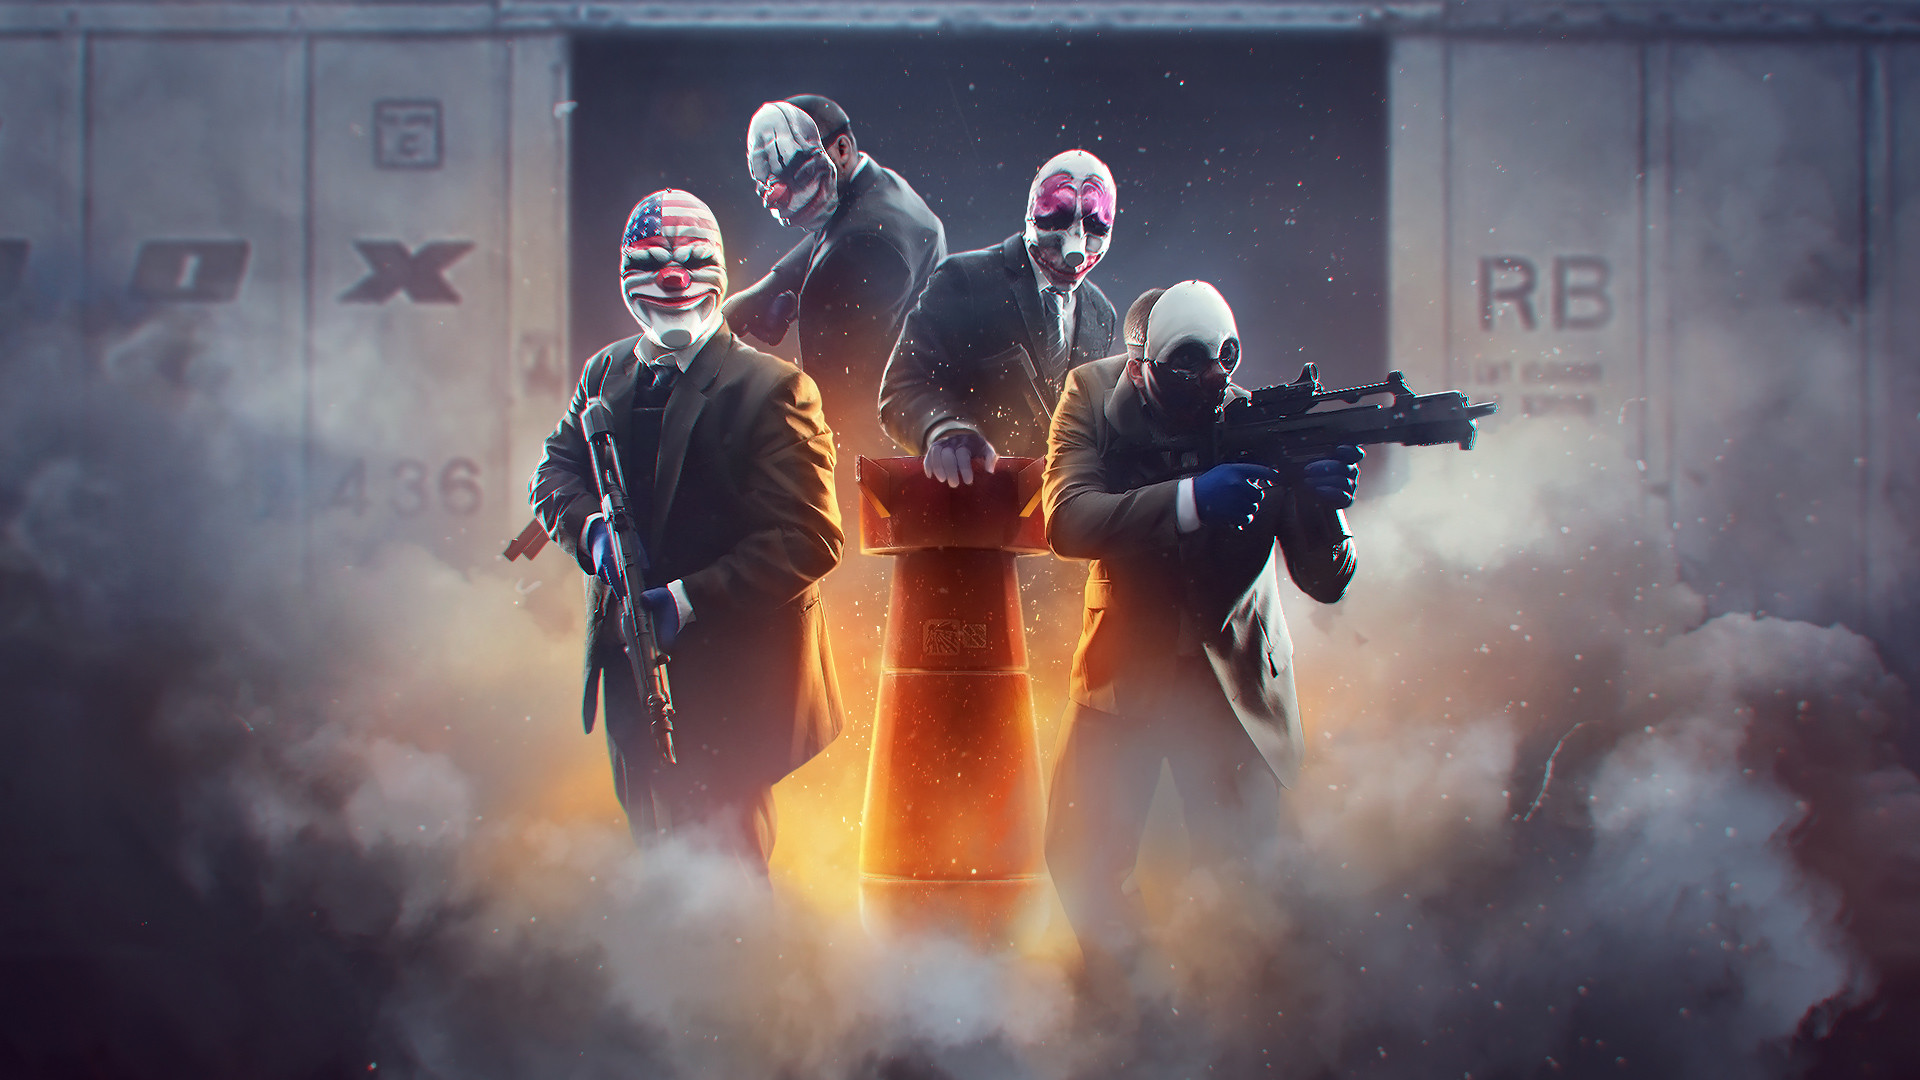 PayDay 2, Software